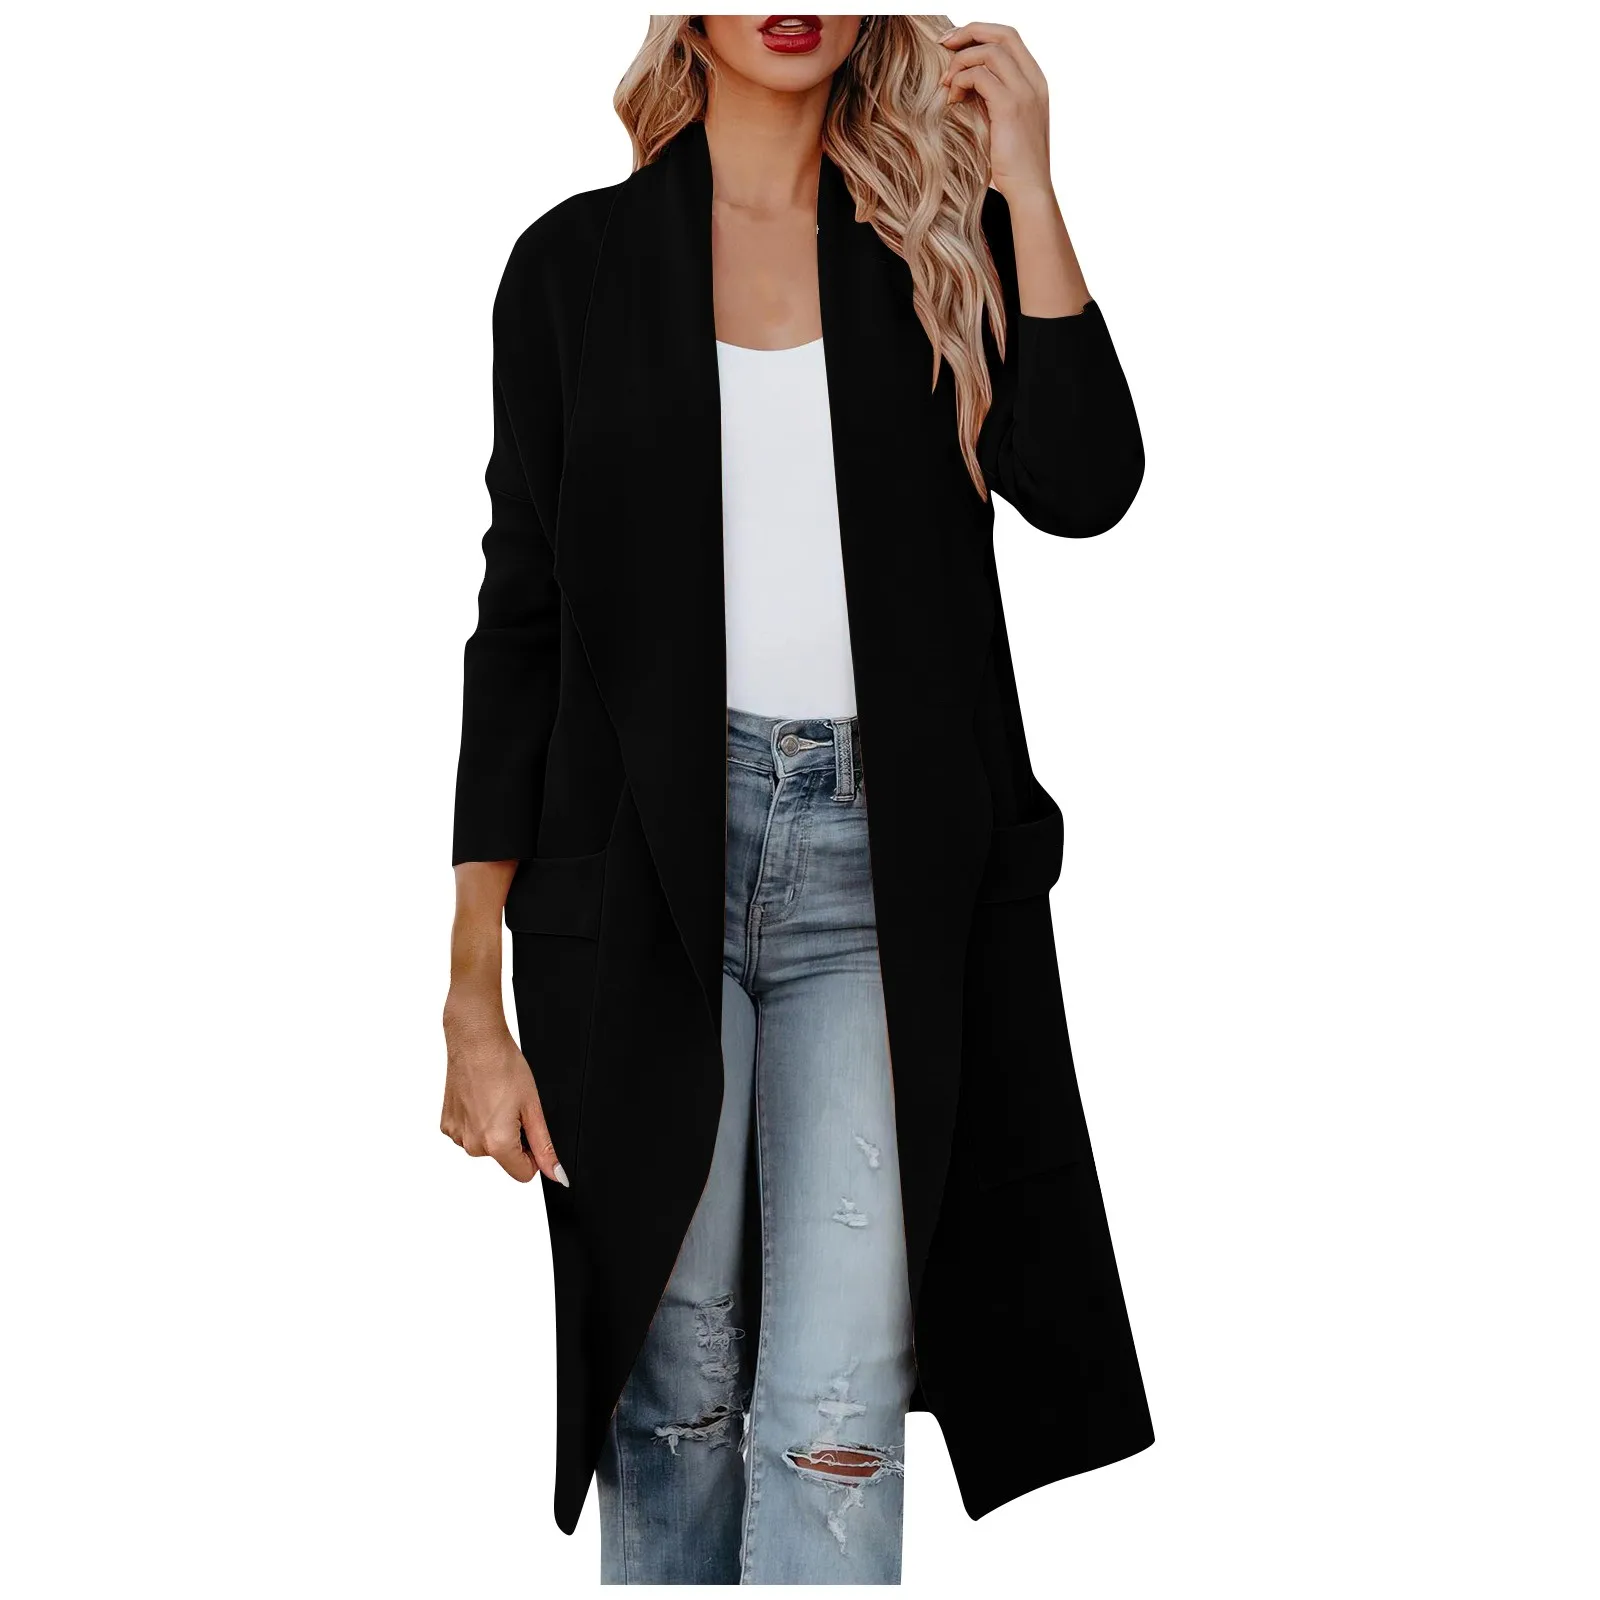 

Women's Casual Long Sleeve Long Cardigan Outwear Draped Open Front Jackets female solid color Autumn And Winter wool Blends